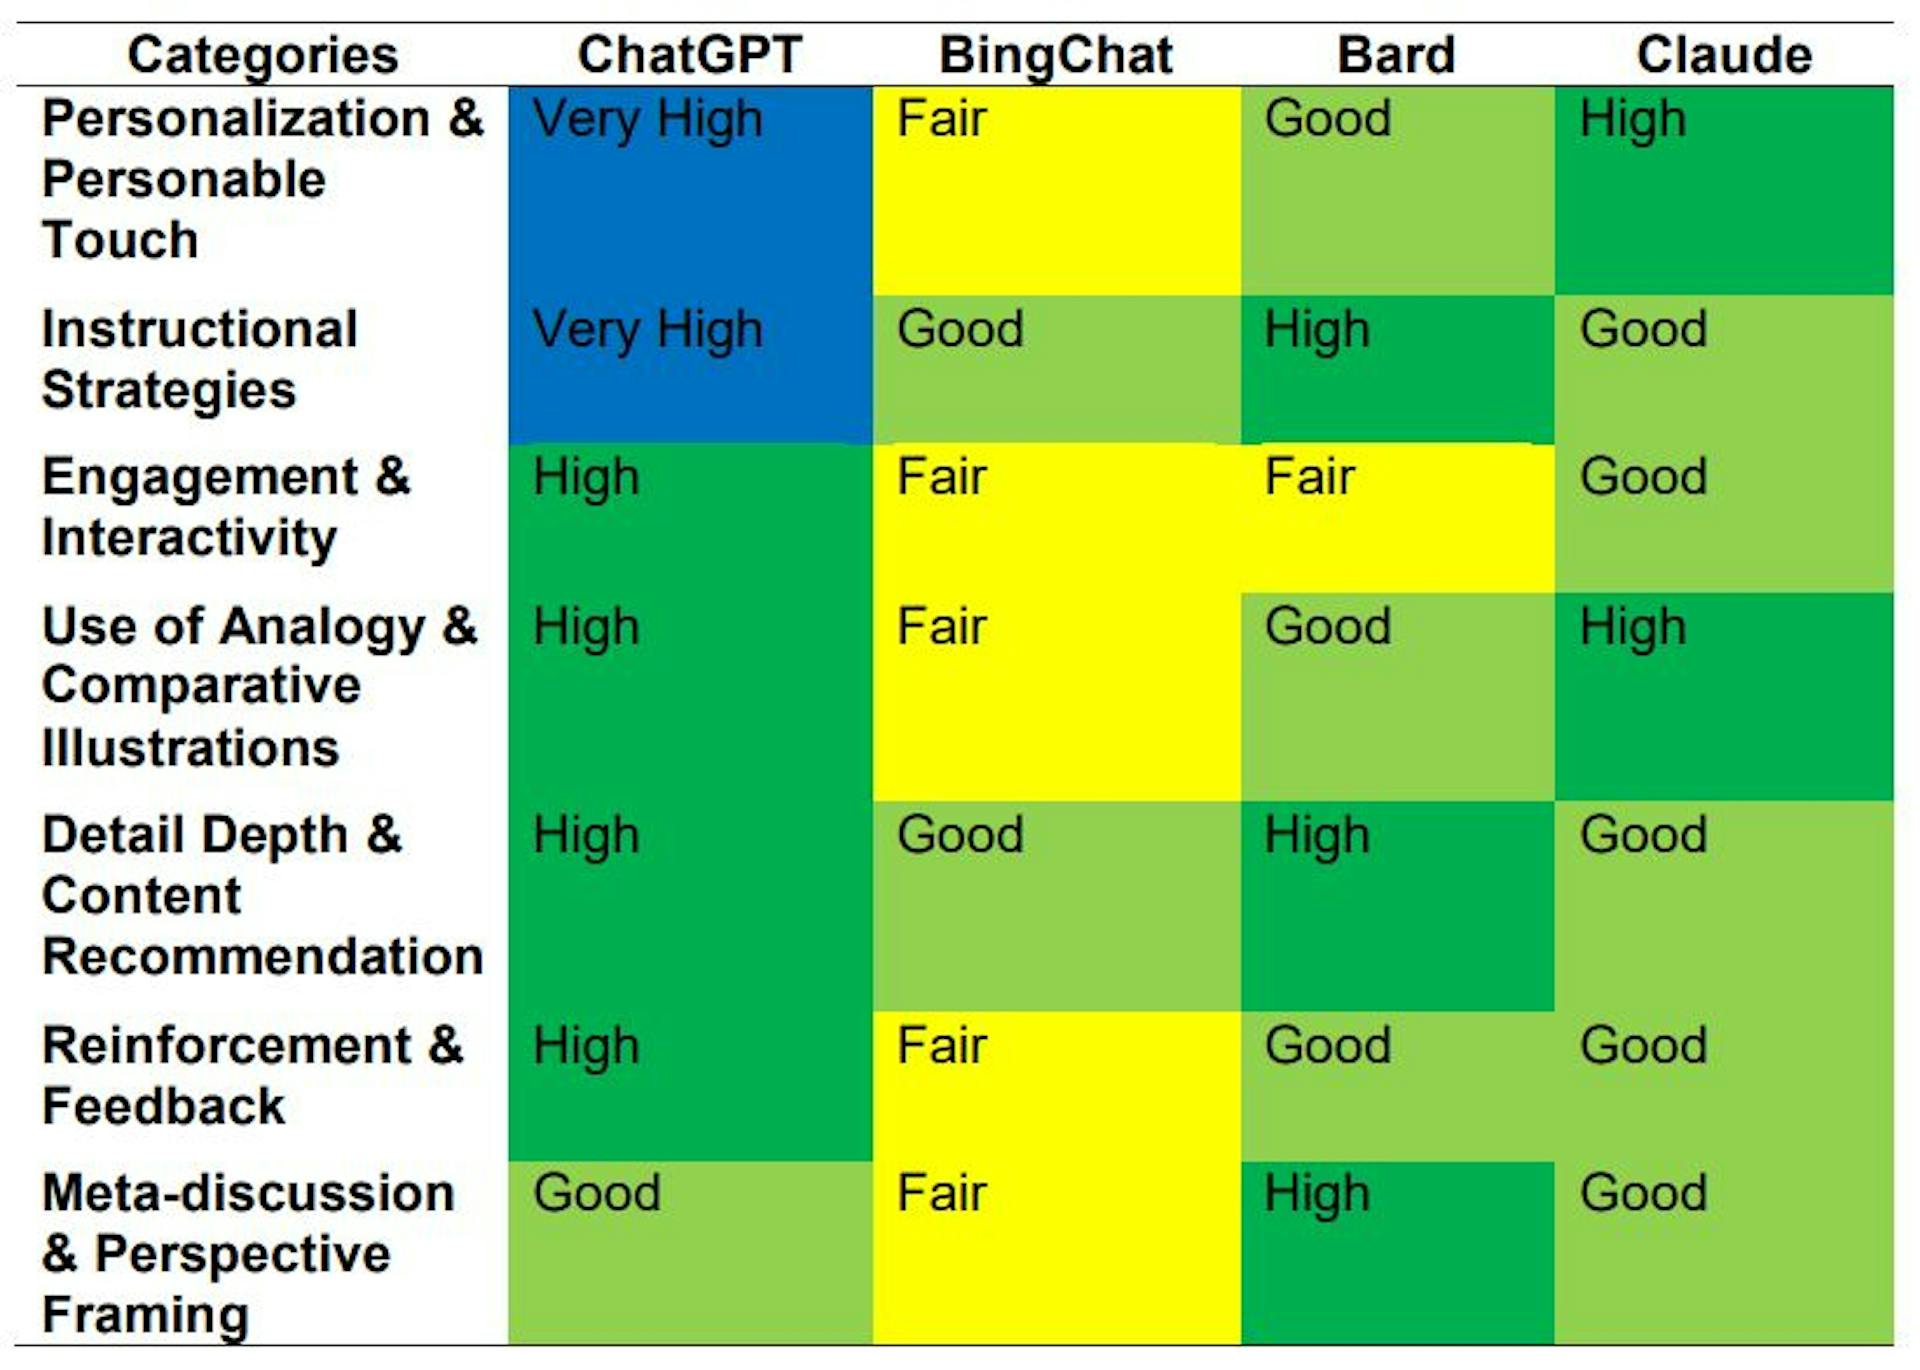 Table 2 Comparative Analysis of ChatGPT, Bing Chat, Bard, and Claude on this Experience